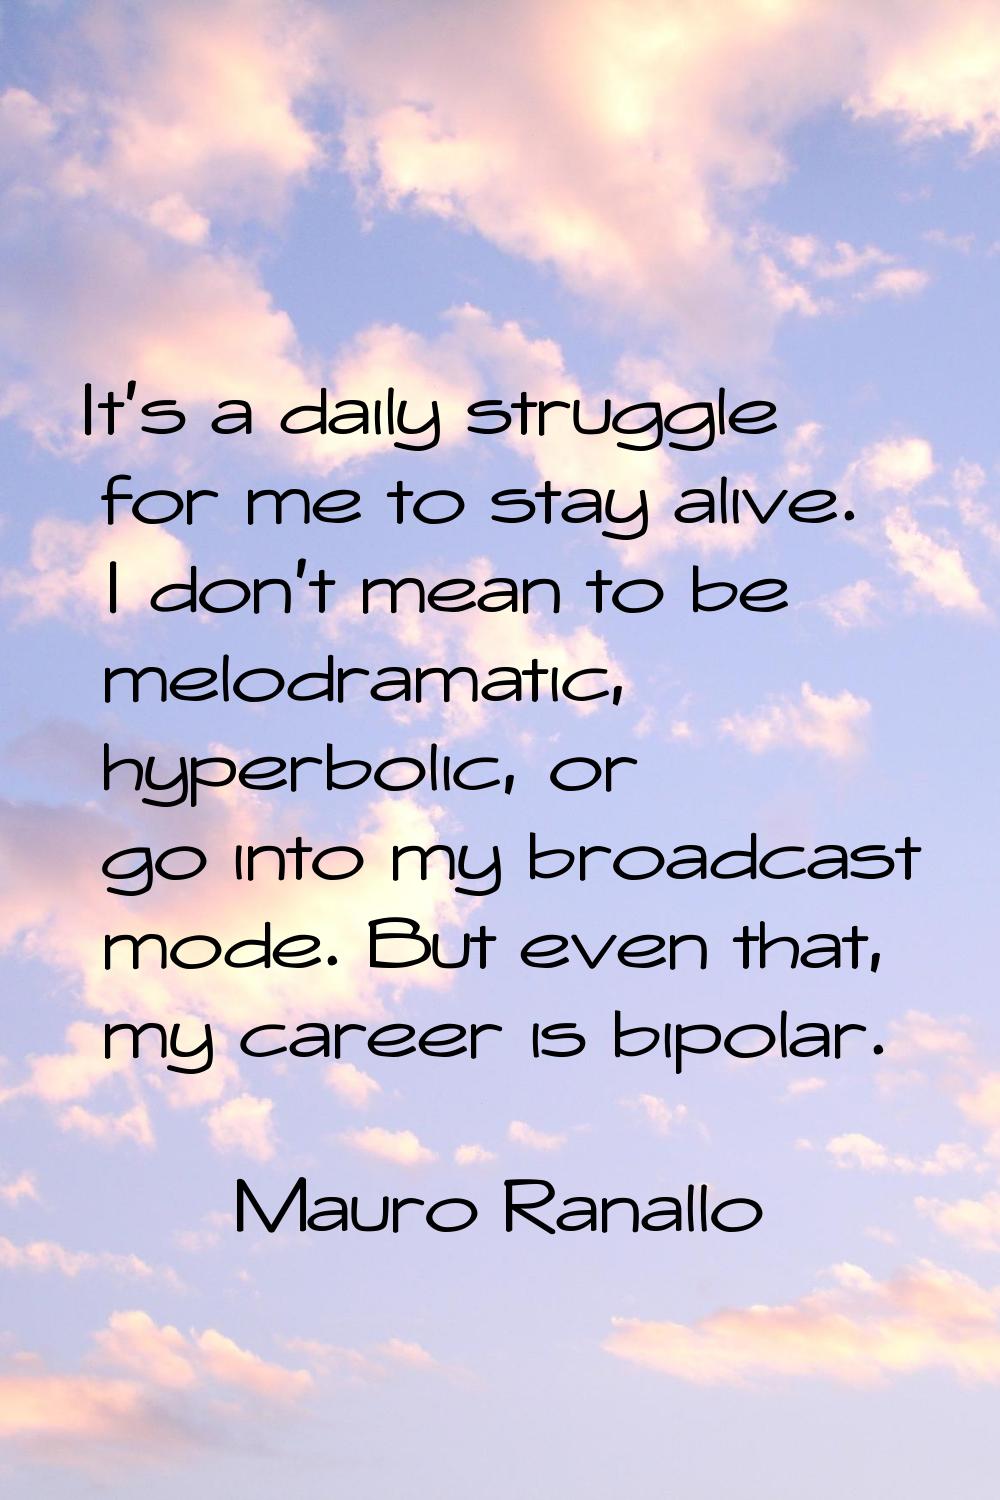 It's a daily struggle for me to stay alive. I don't mean to be melodramatic, hyperbolic, or go into